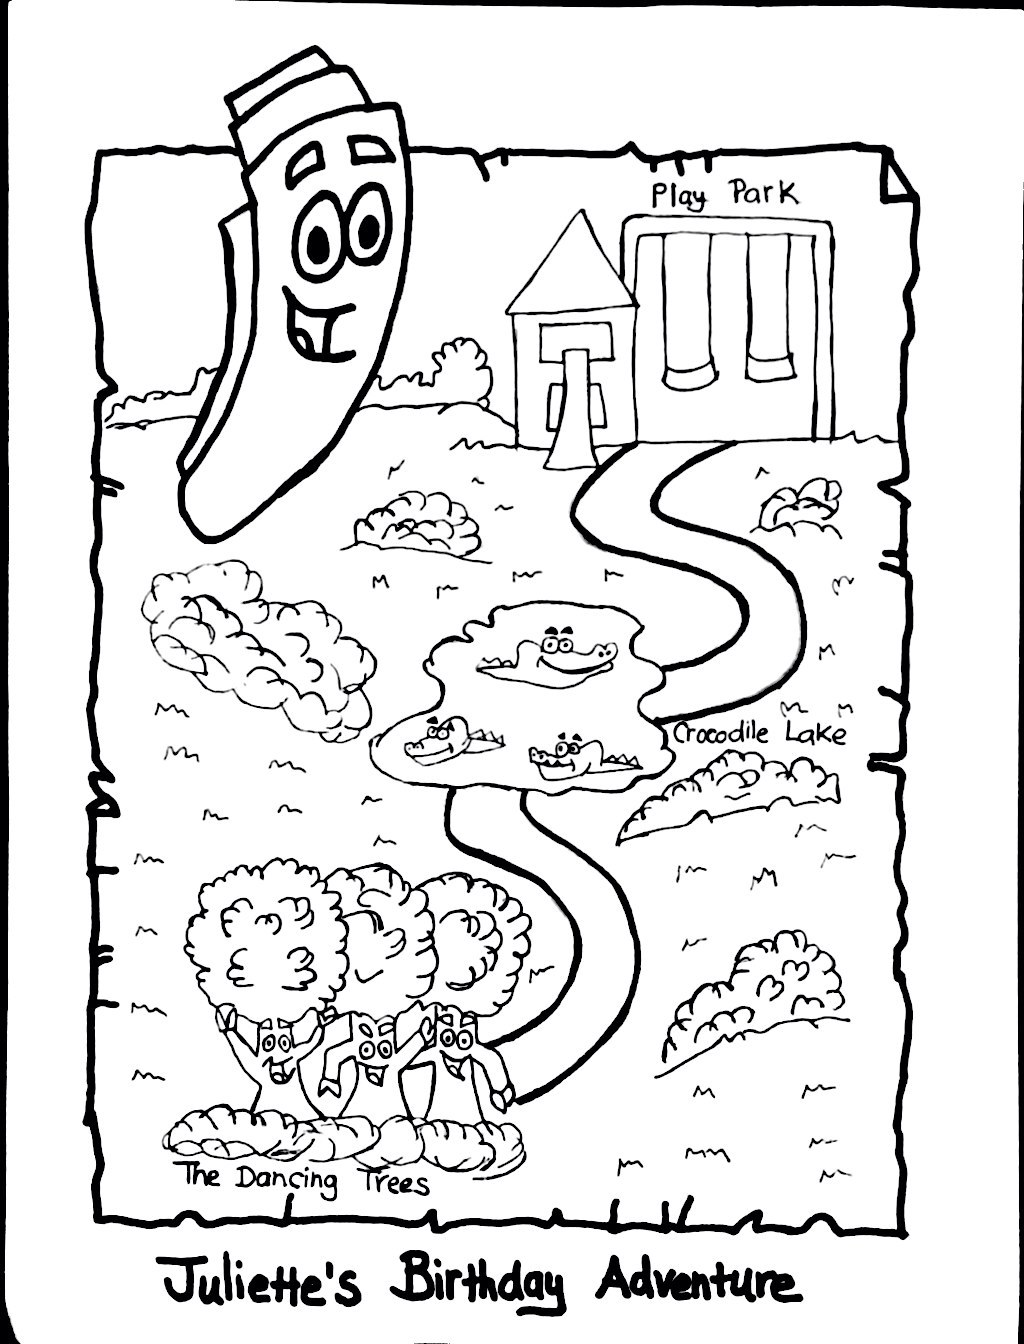 dora the explorer birthday coloring pages